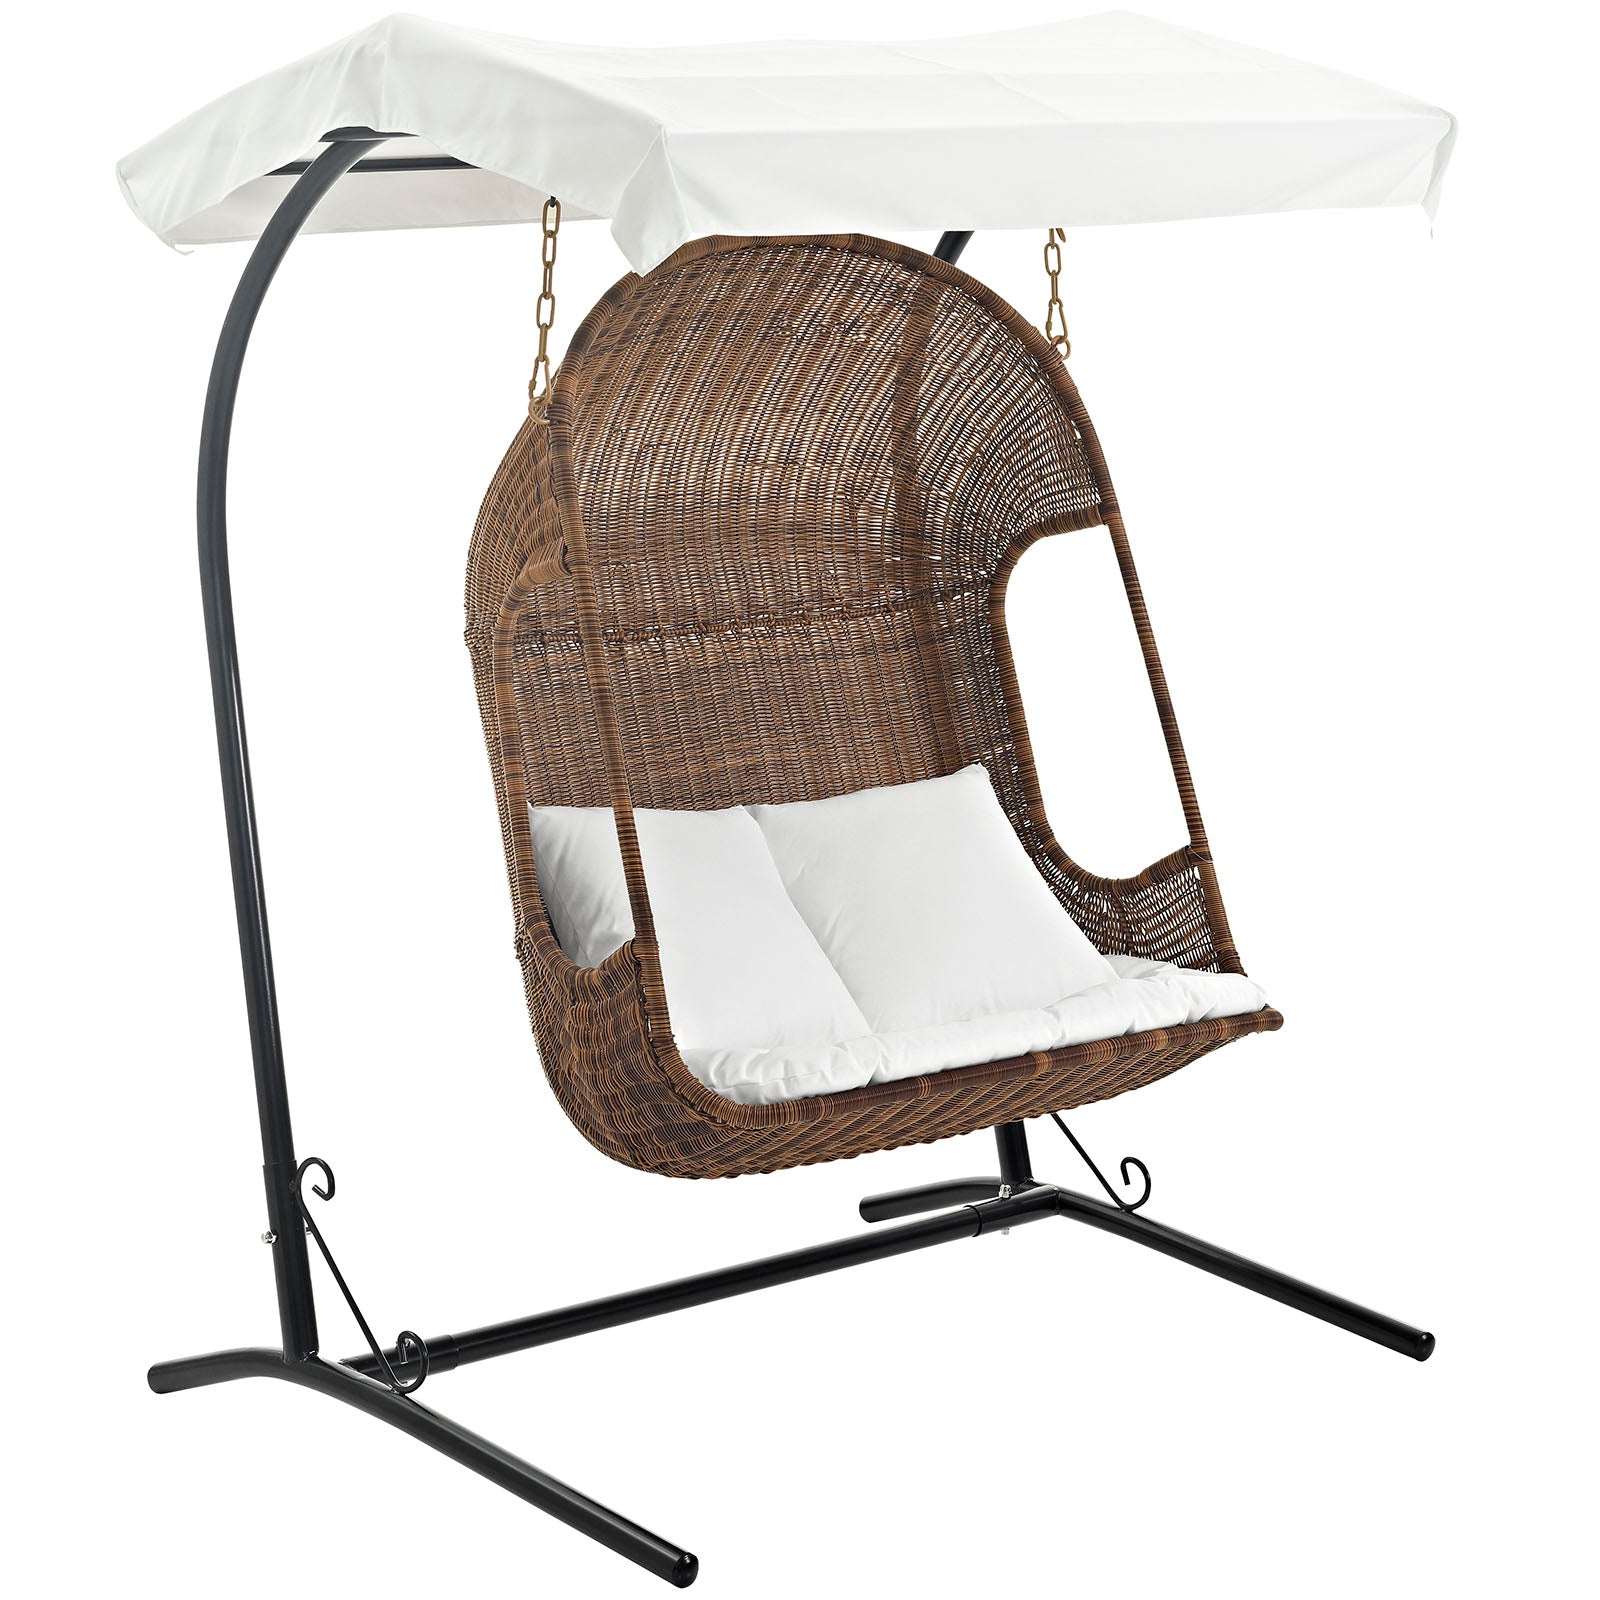 Hanging Wicker Chair With 2 Pillows - Vantage Outdoor Patio Swing Chair With Stand - With White Cushions